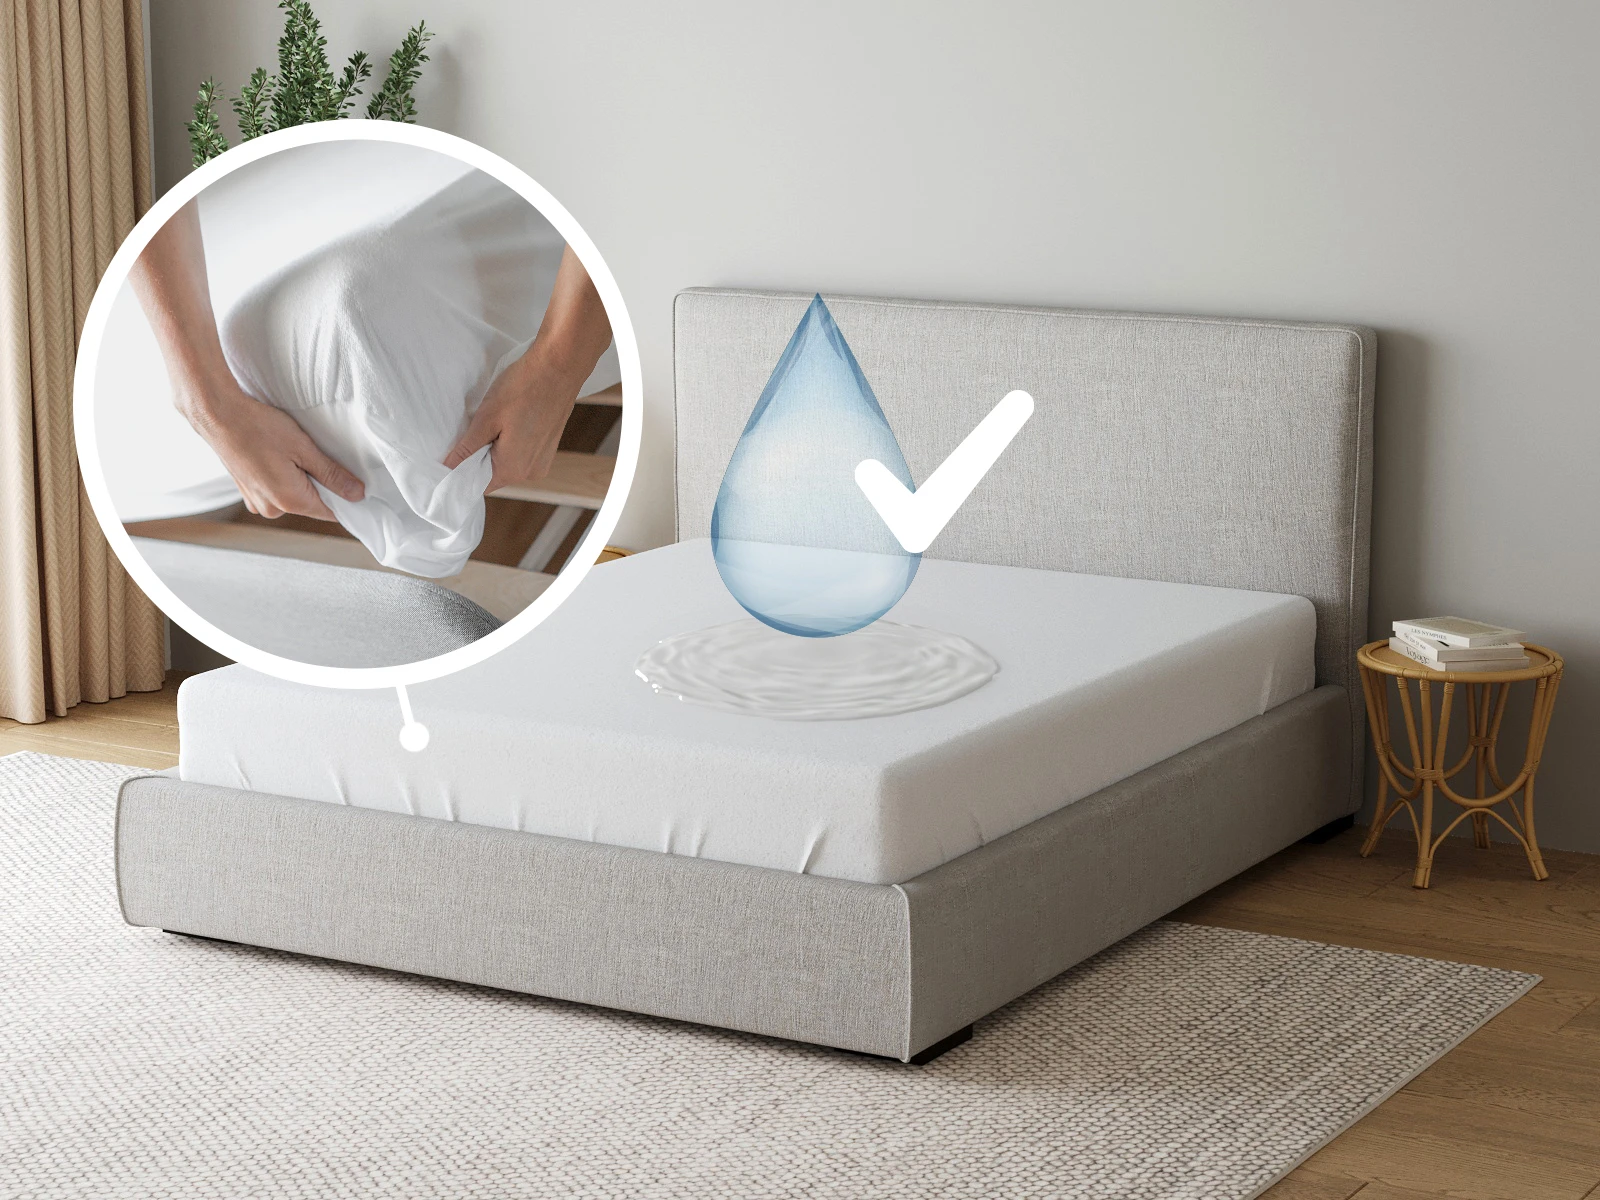 1 Waterproof mattress protector all-round protective cover 120x200 cm